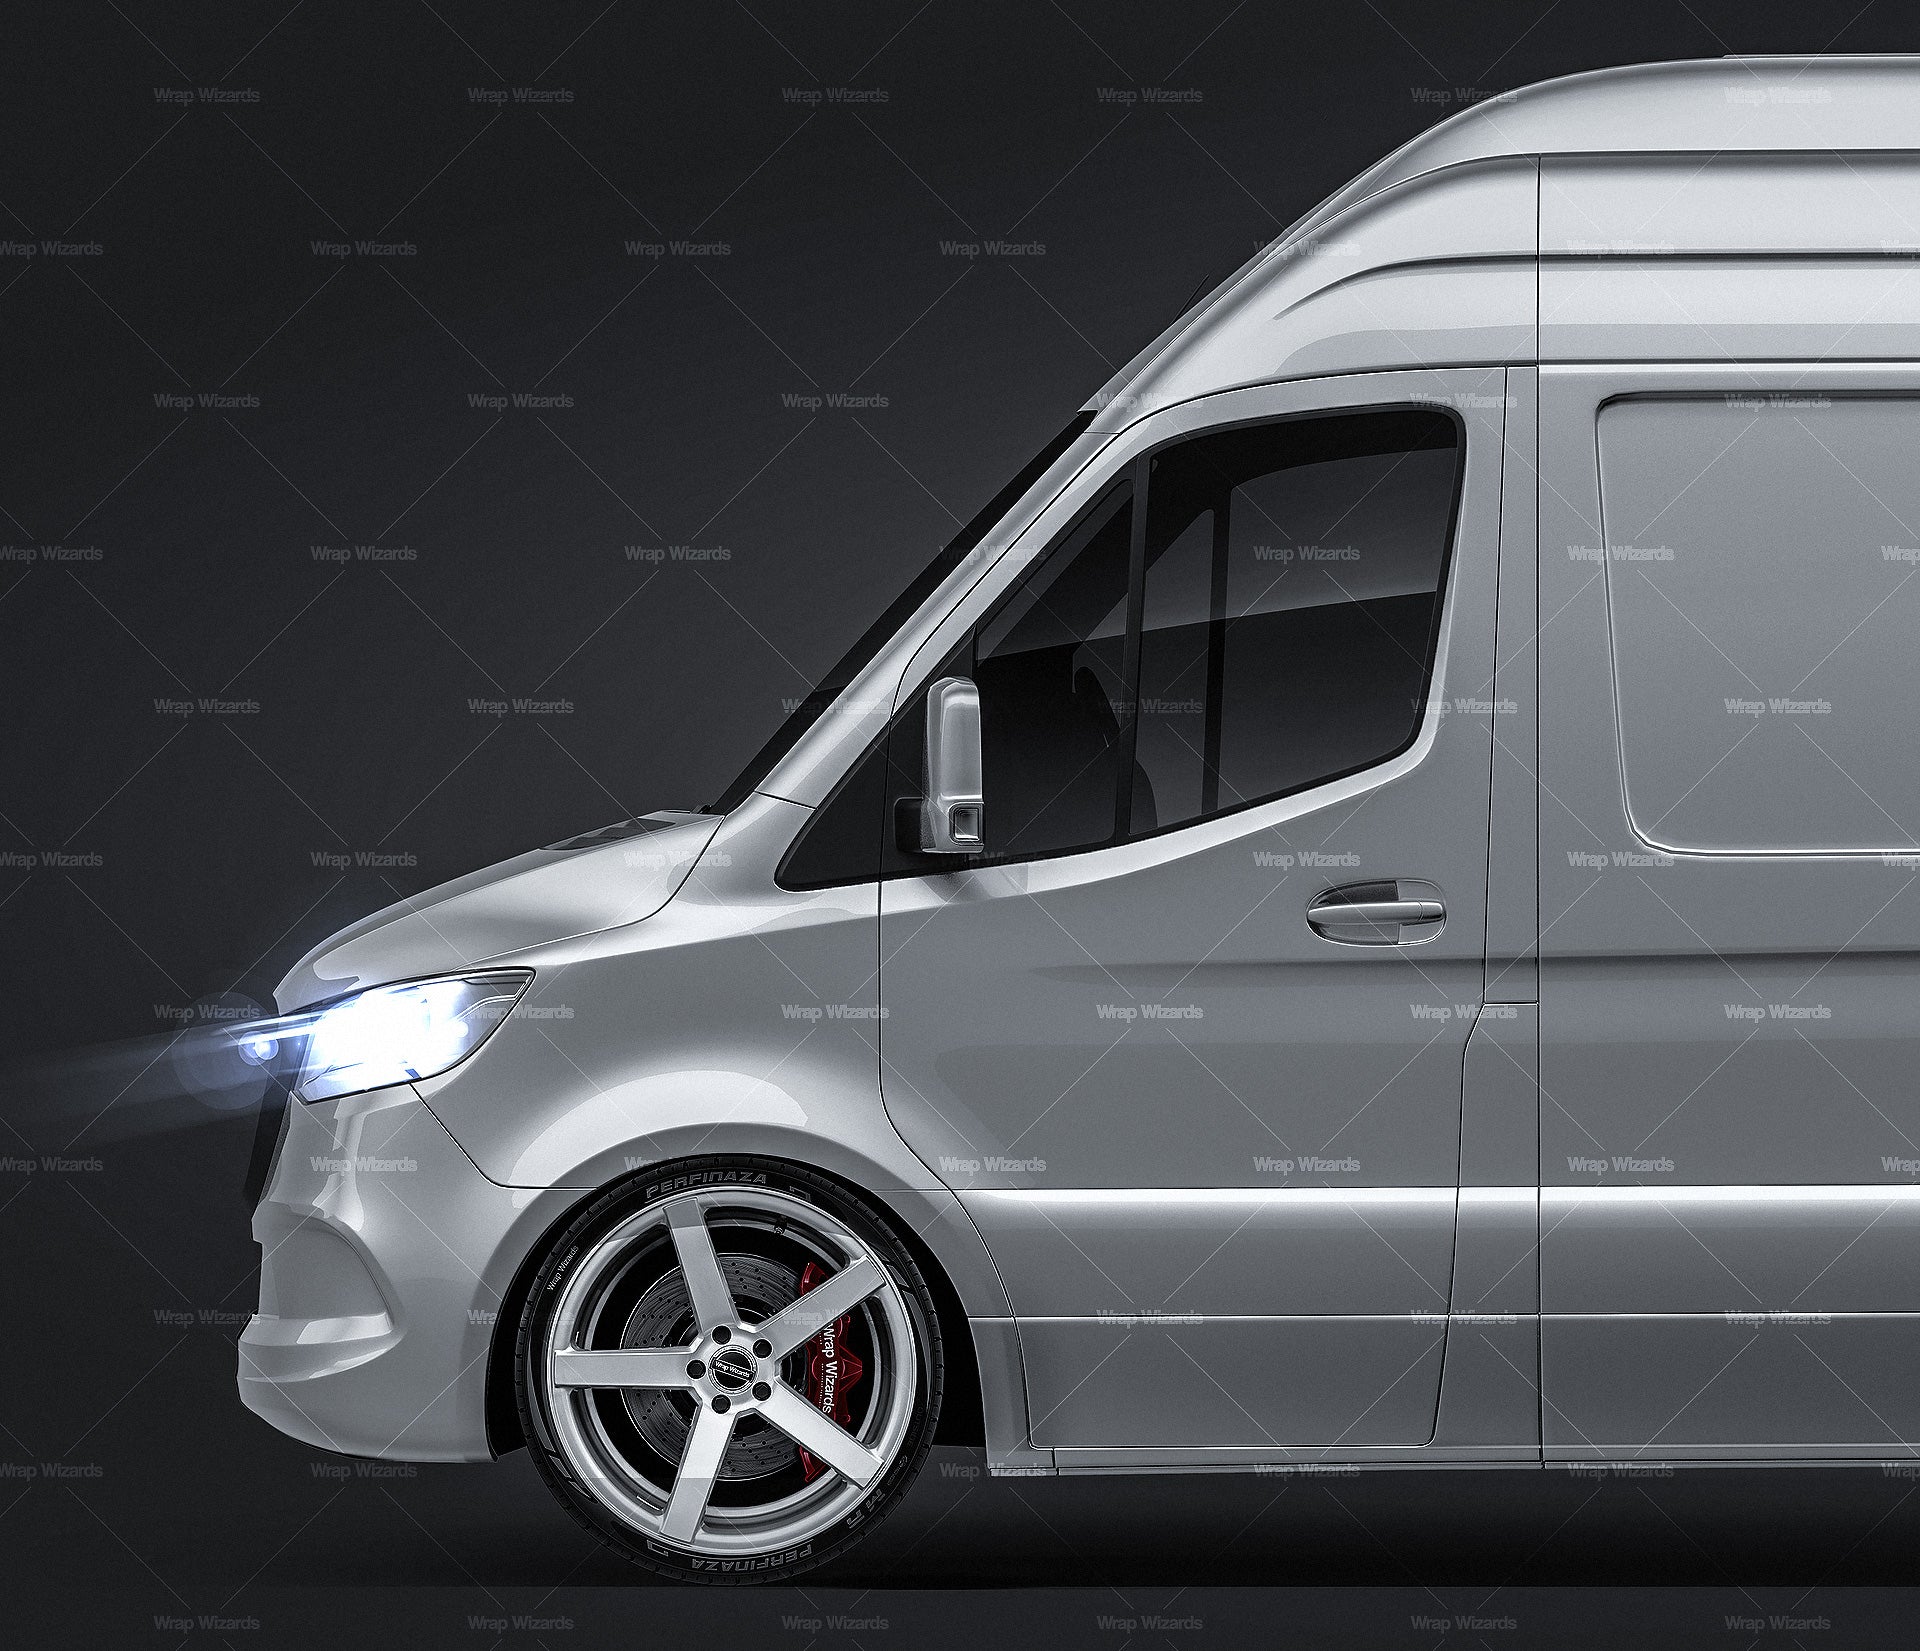 Mercedes-Benz Sprinter Long High Roof L3H3 2019 glossy finish - all sides Car Mockup Template.psd